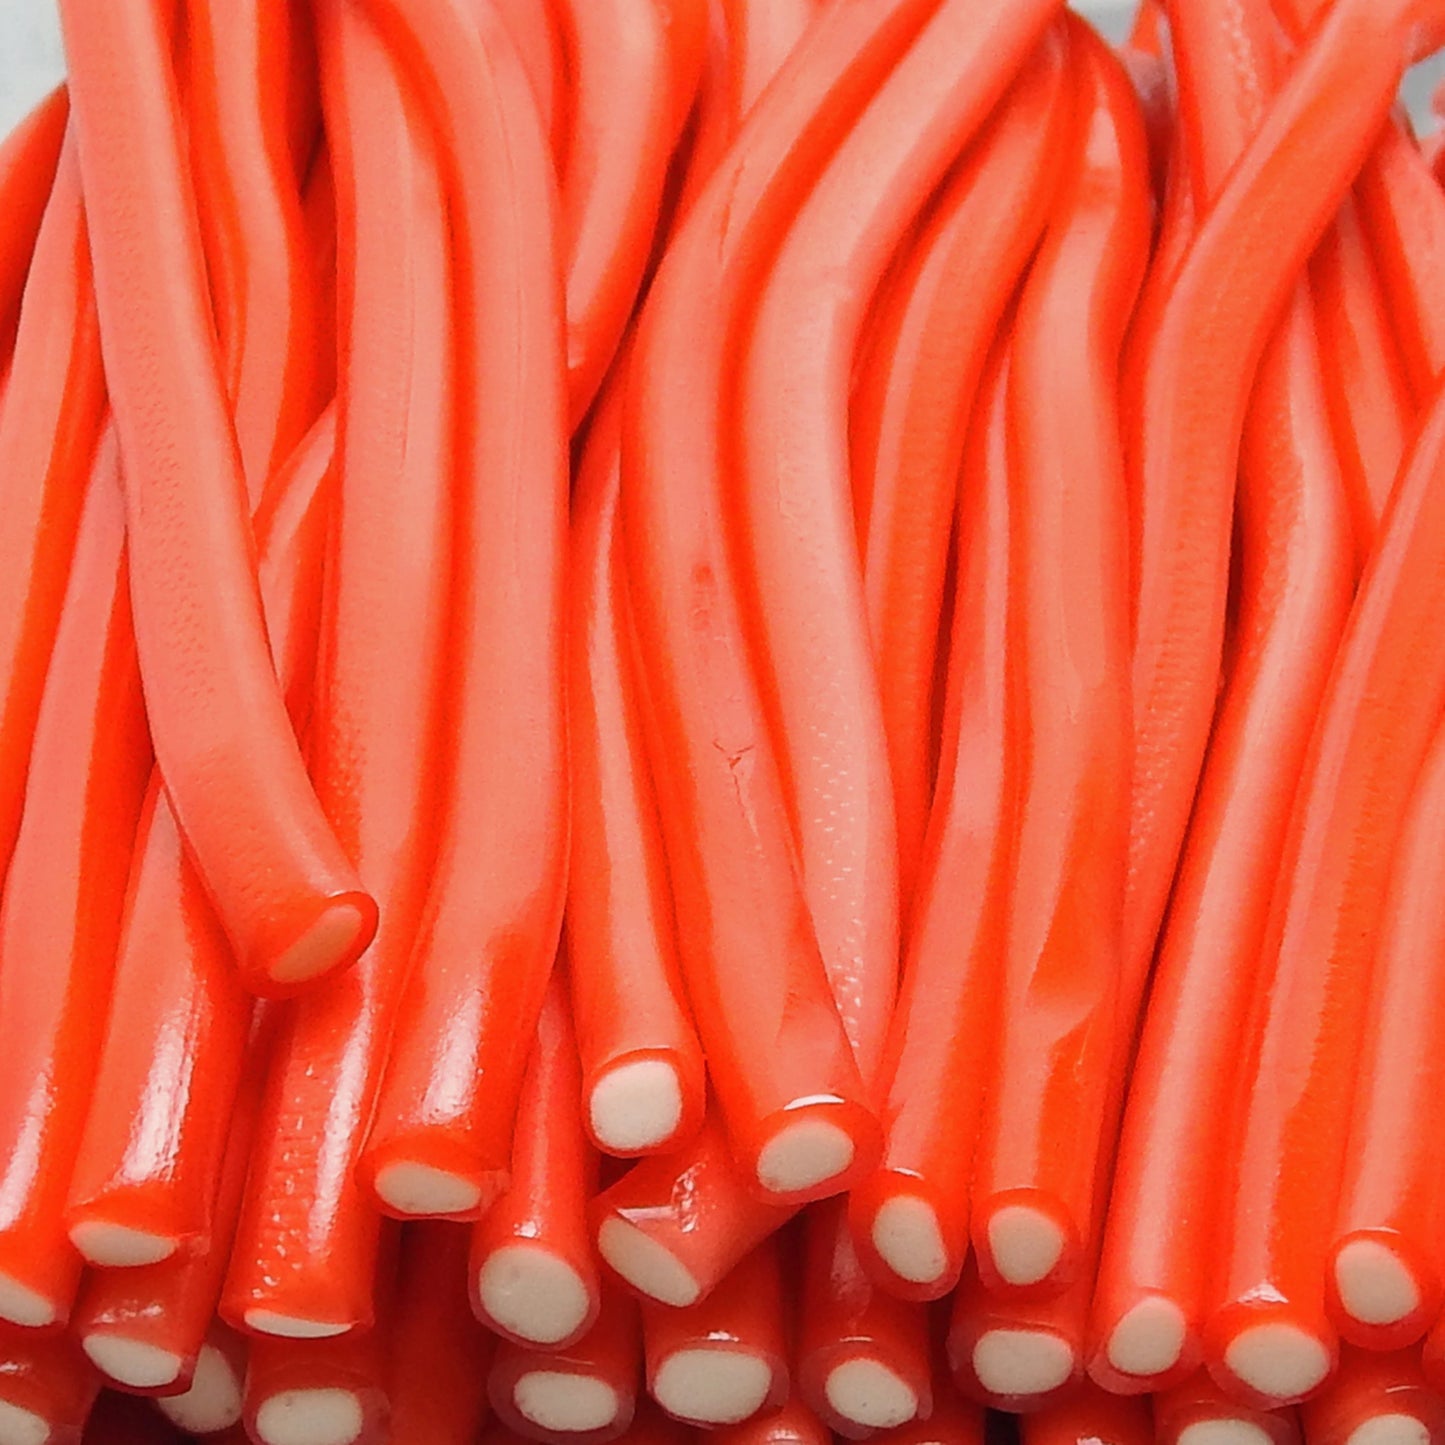 Strawberry Pencils - Retro Sweets at The Sweetie Jar